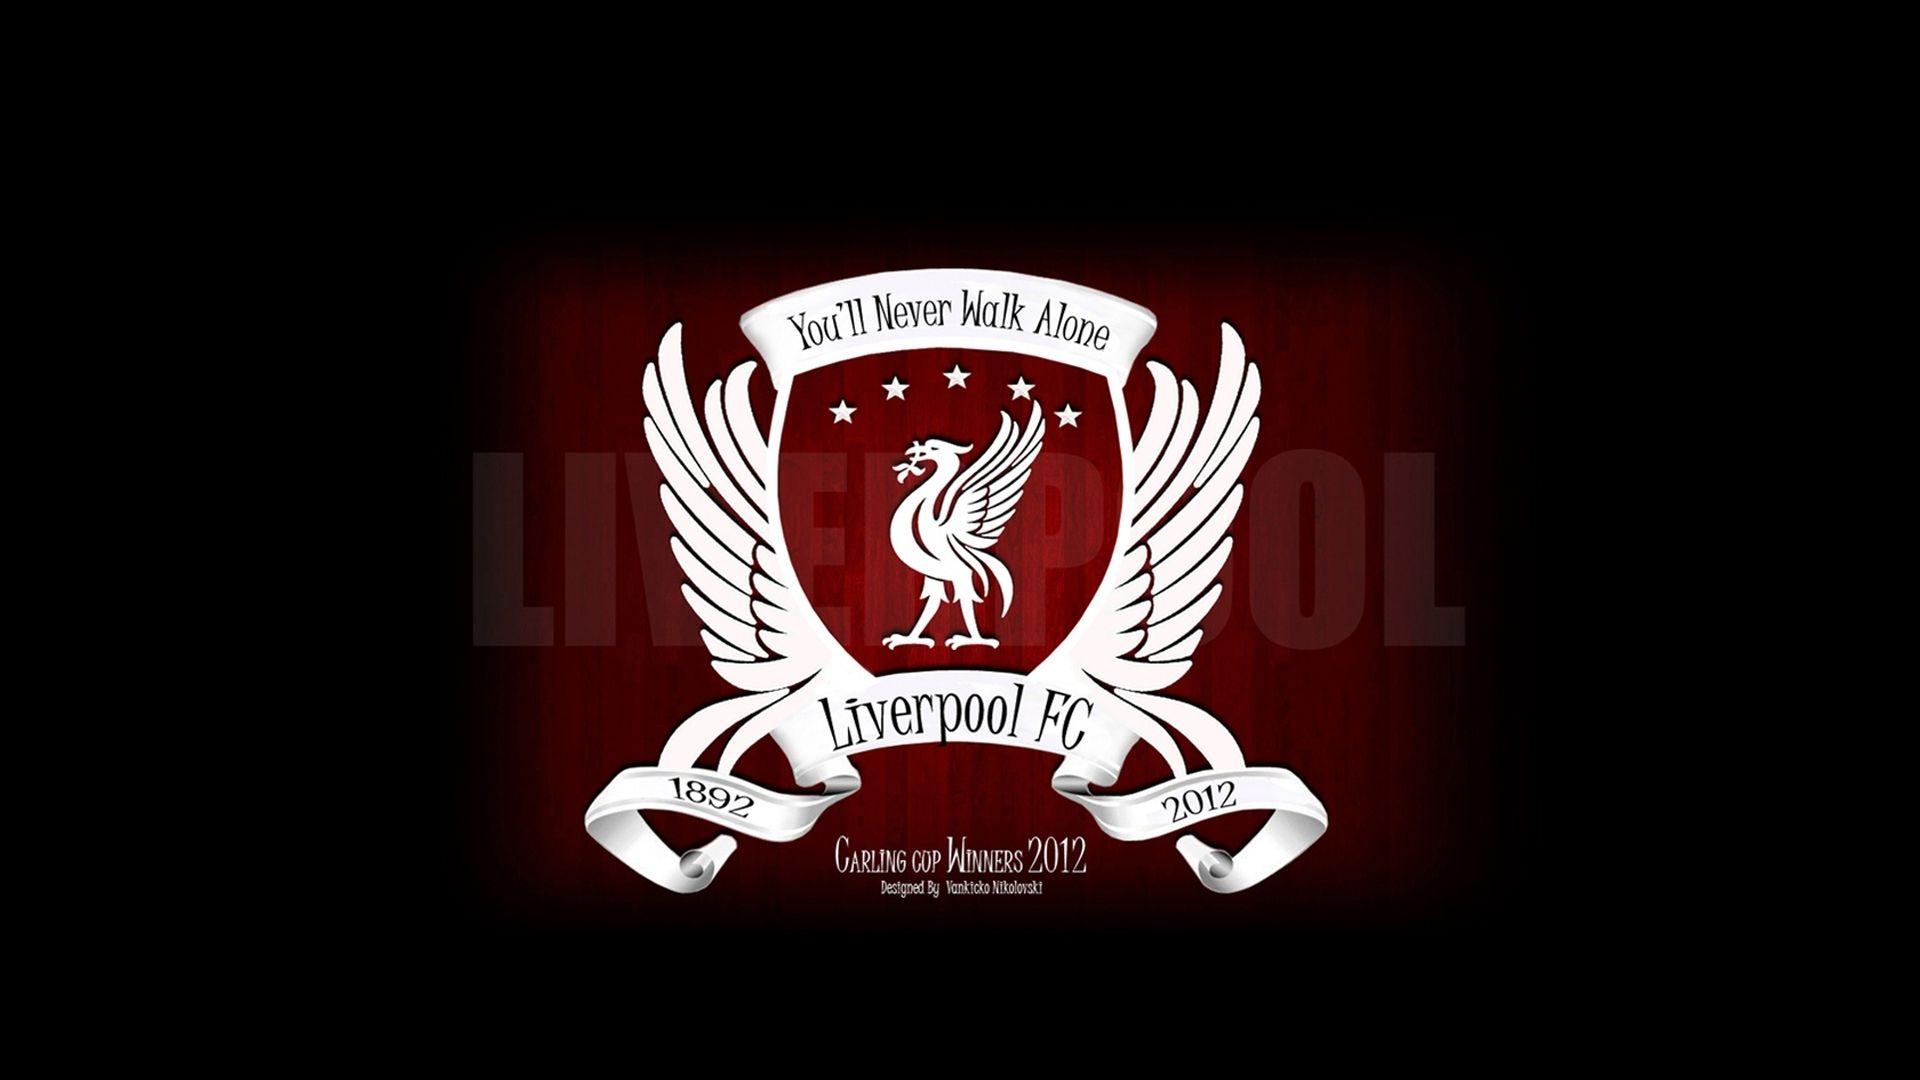 Cool Liverpool FC Wallpaper for desktop and mobile